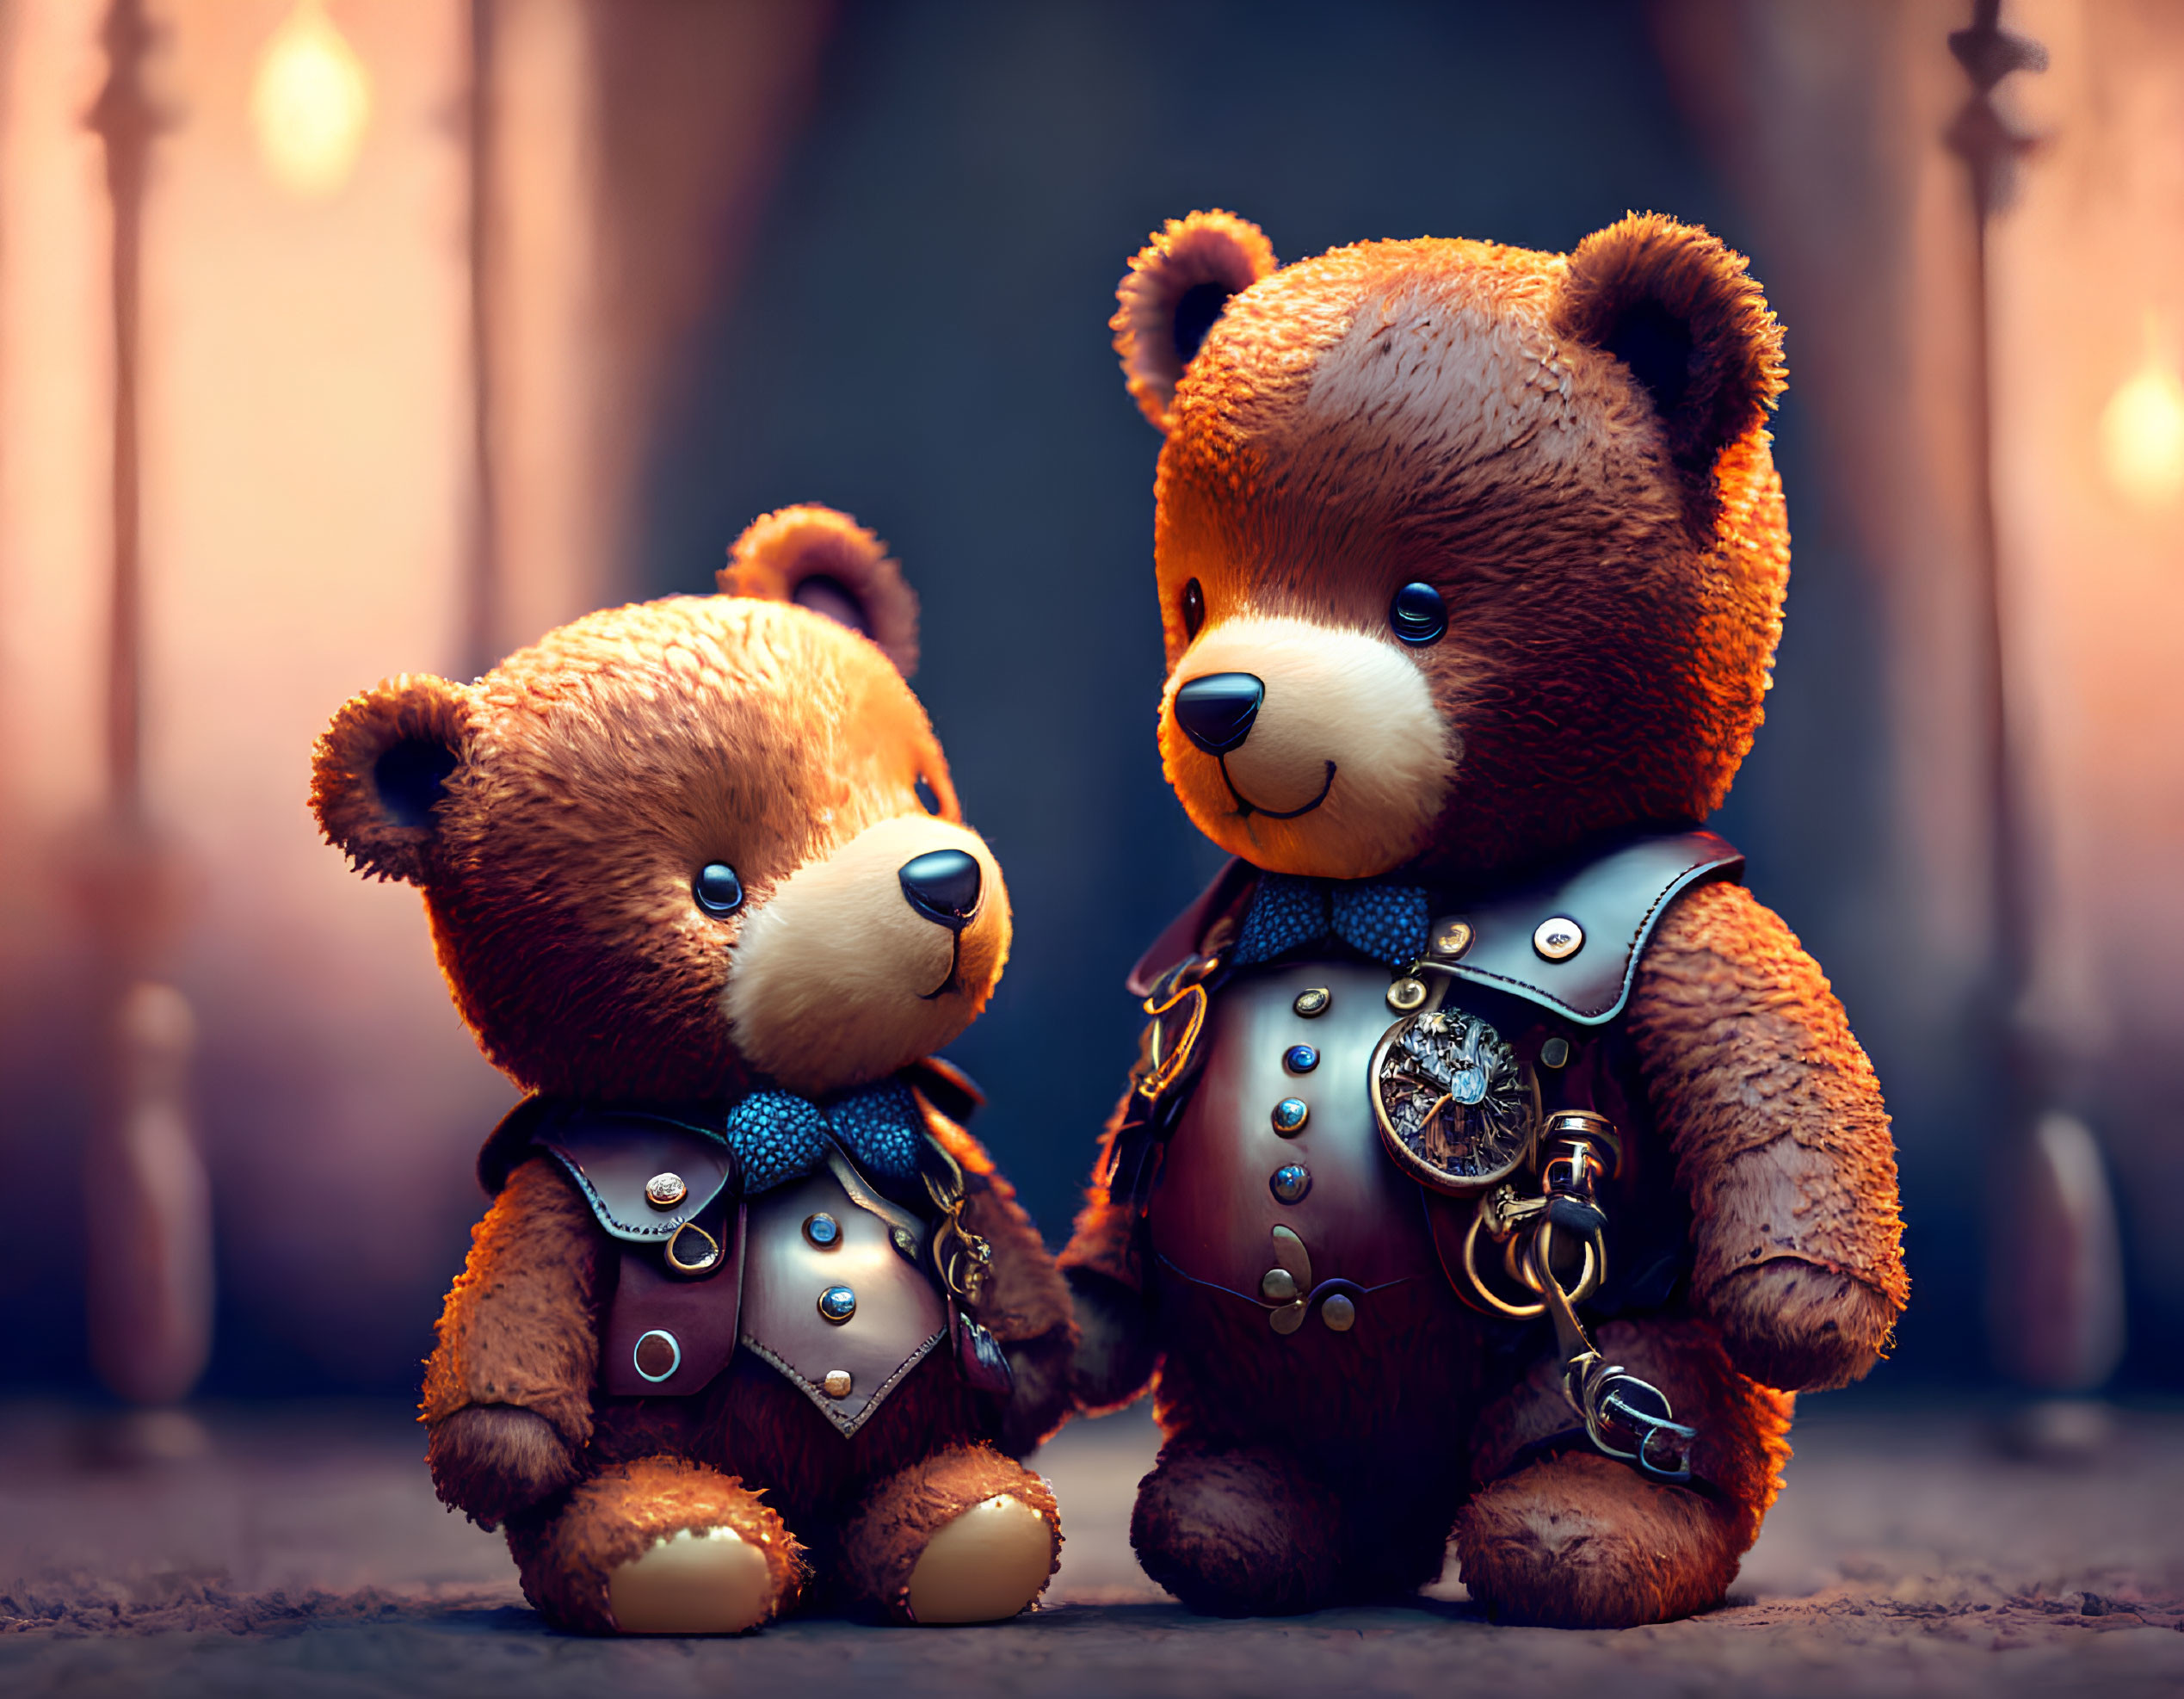 Steampunk-themed teddy bears in detailed outfits against warm, torch-lit backdrop